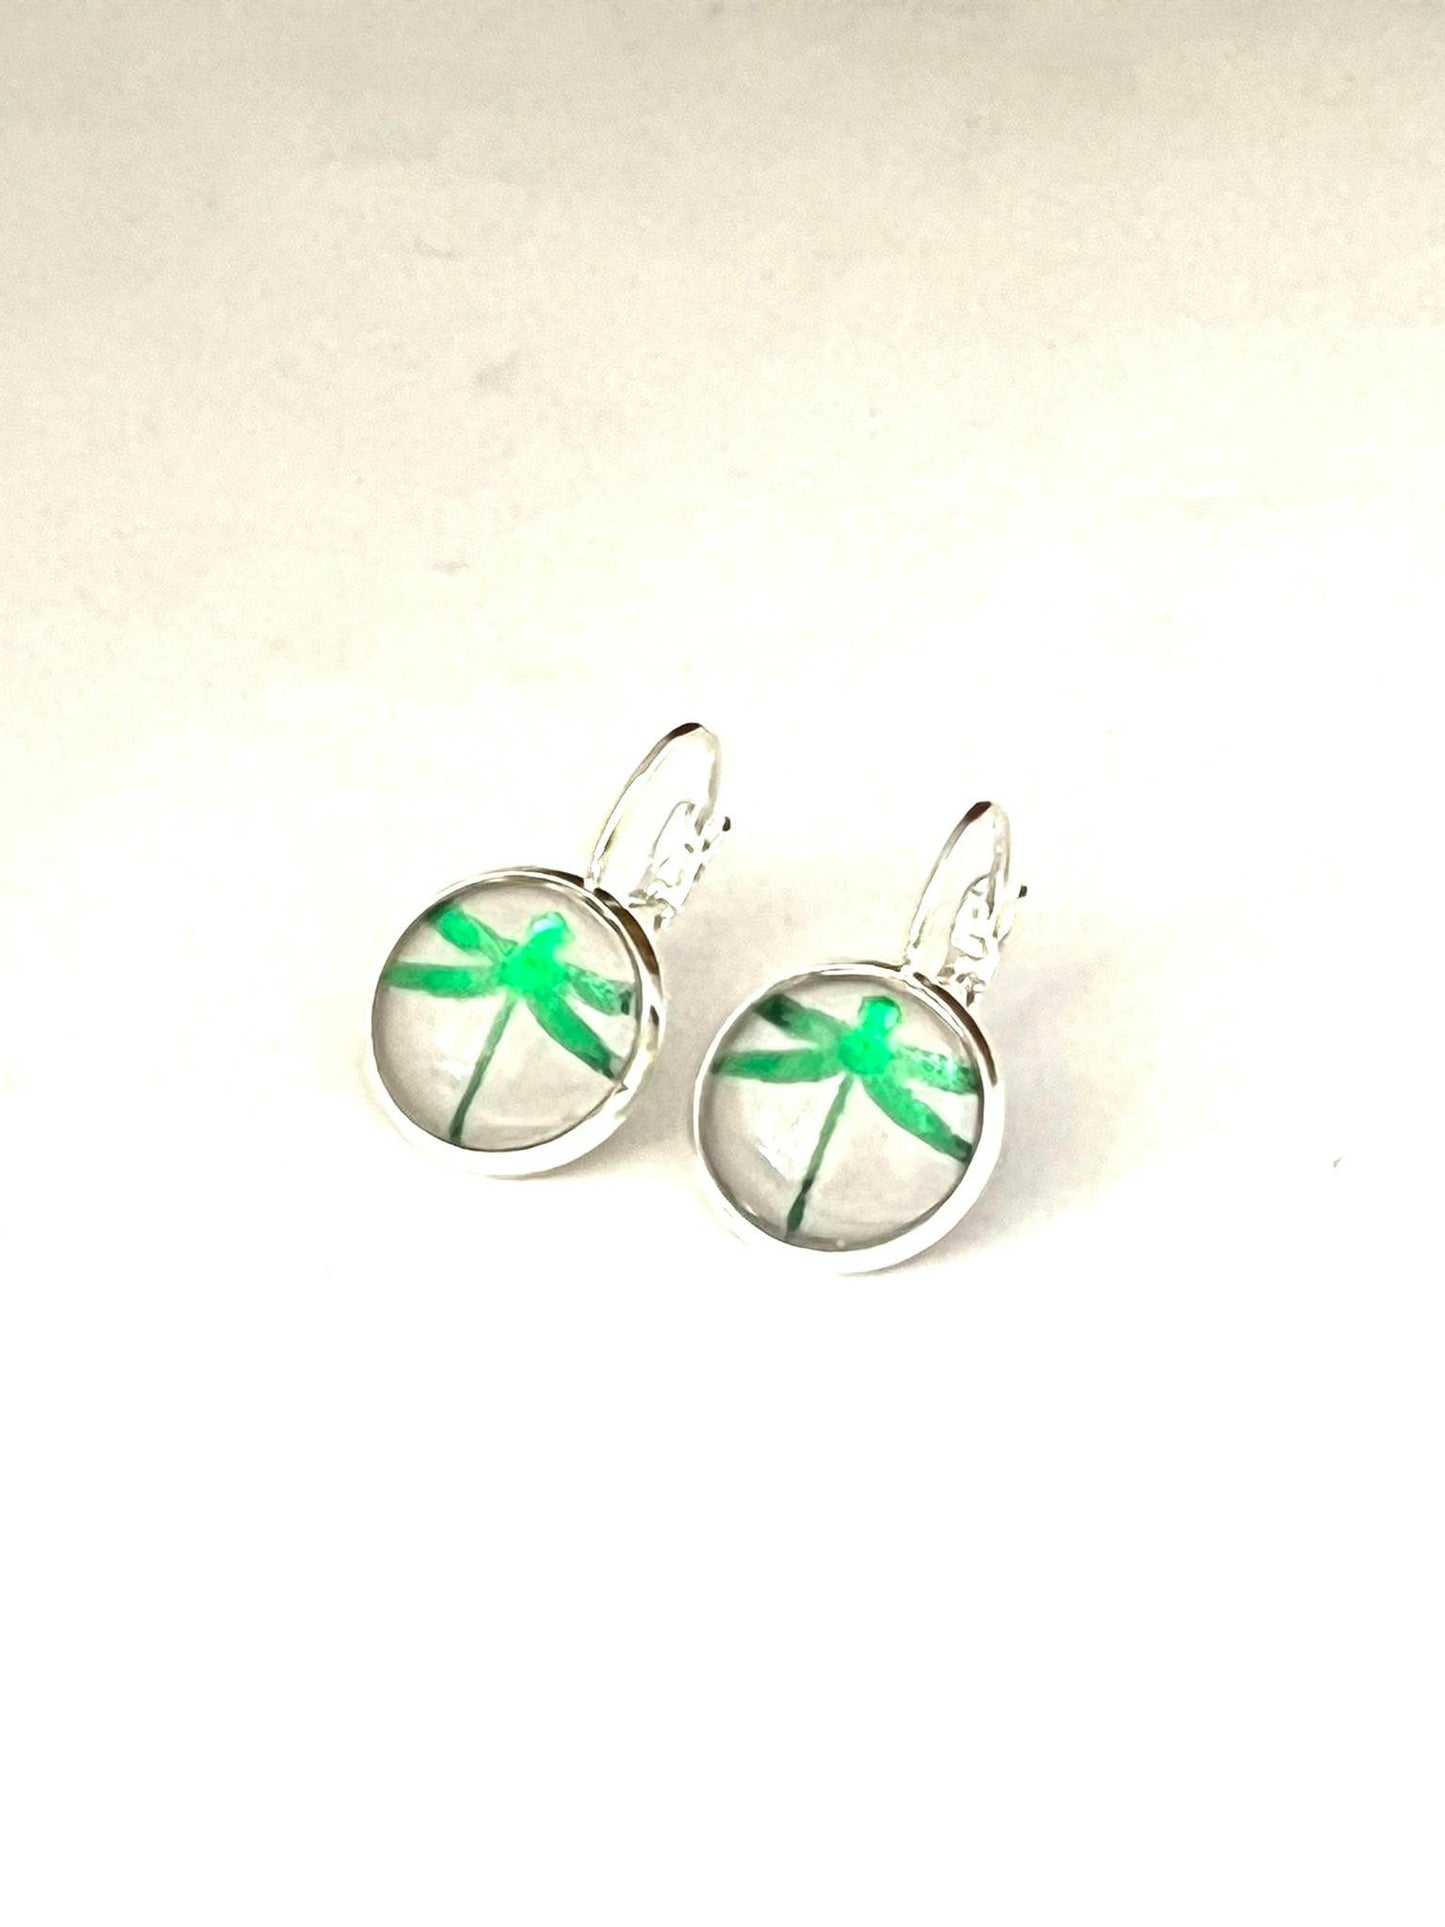 Emerald green metallic dragonfly glass dome earrings on a dove grey background